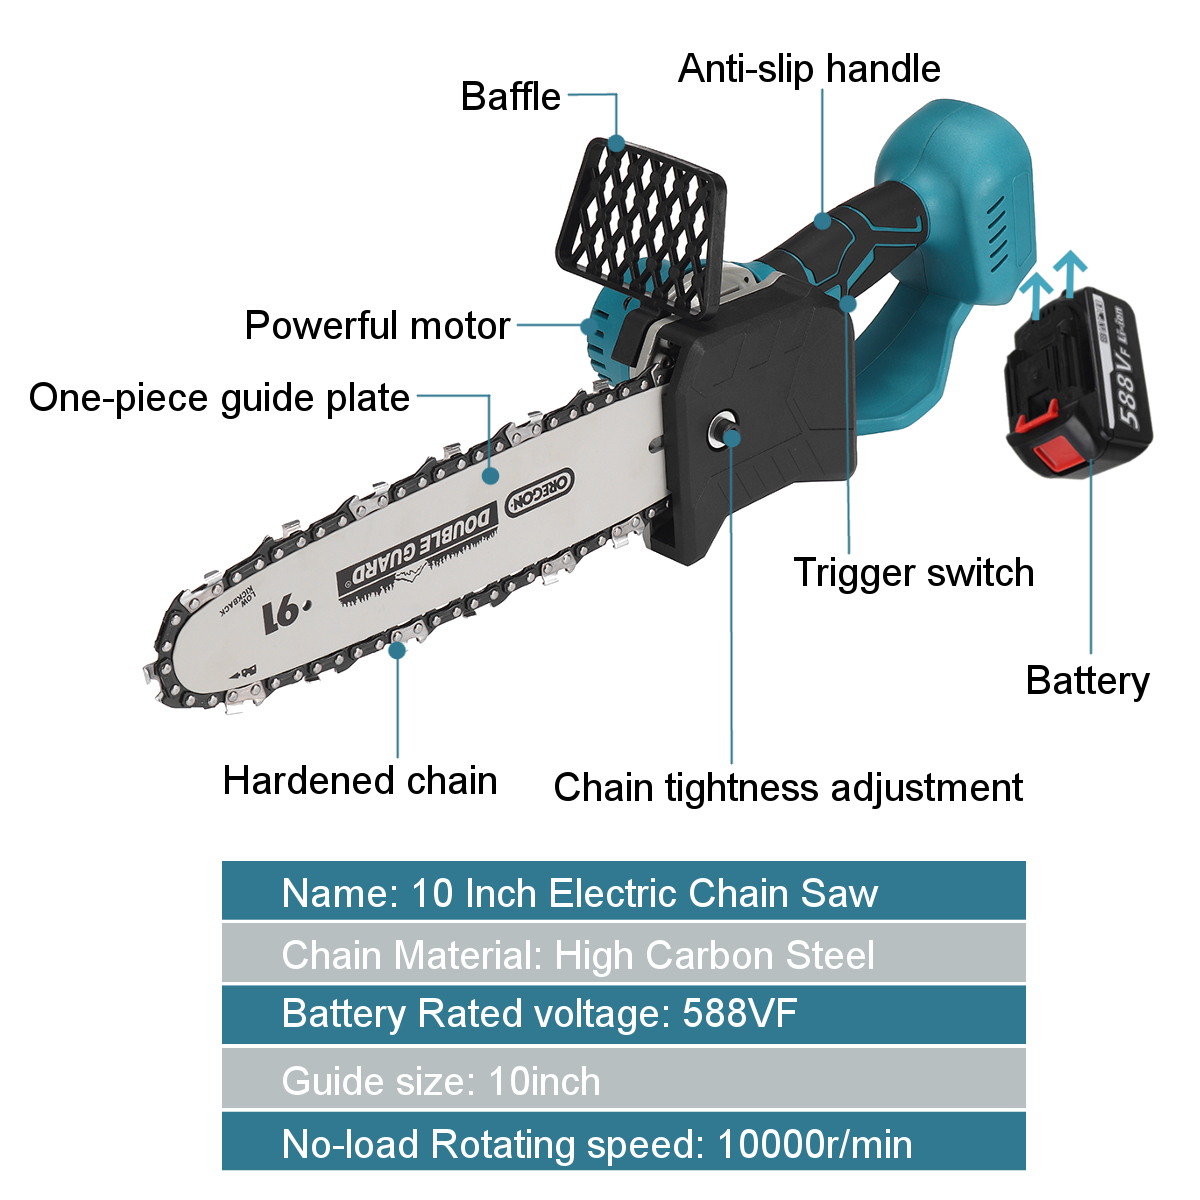 10-Inch-588VF-Electric-Chain-Saw-Woodworking-Tool-Portable-Chainsaws-w-1pc2pcs-Battery-For-Cutting-P-1823938-9